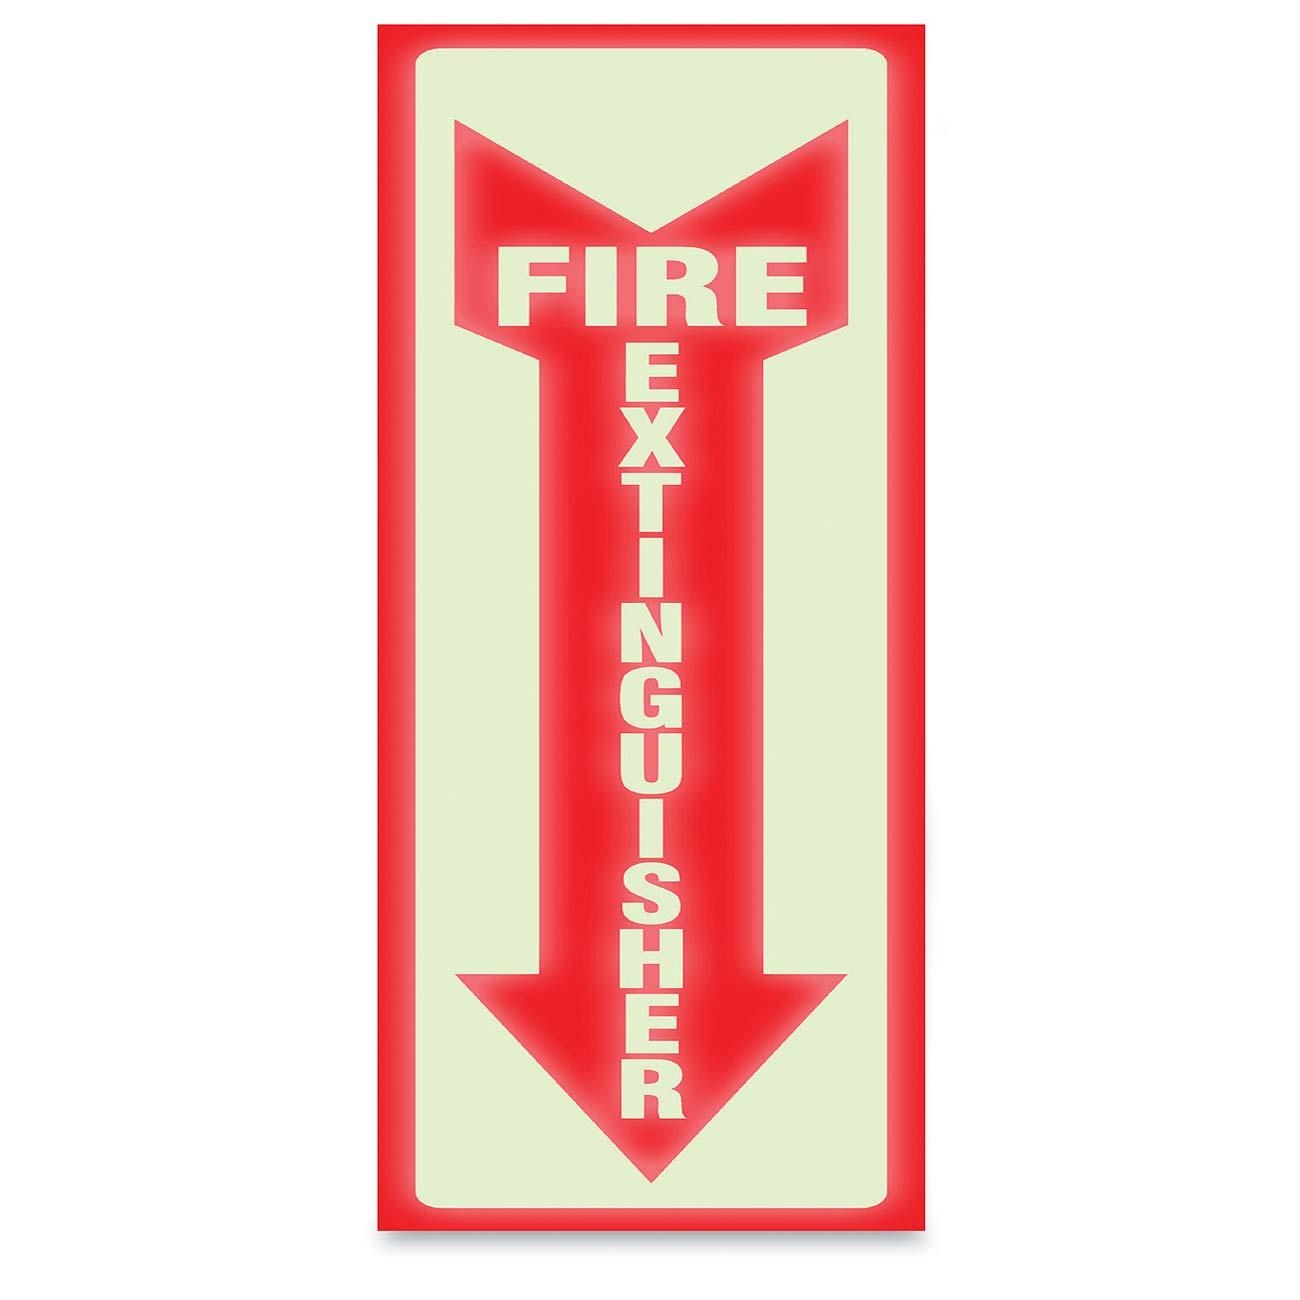 Fire Extinguisher Sign Printable